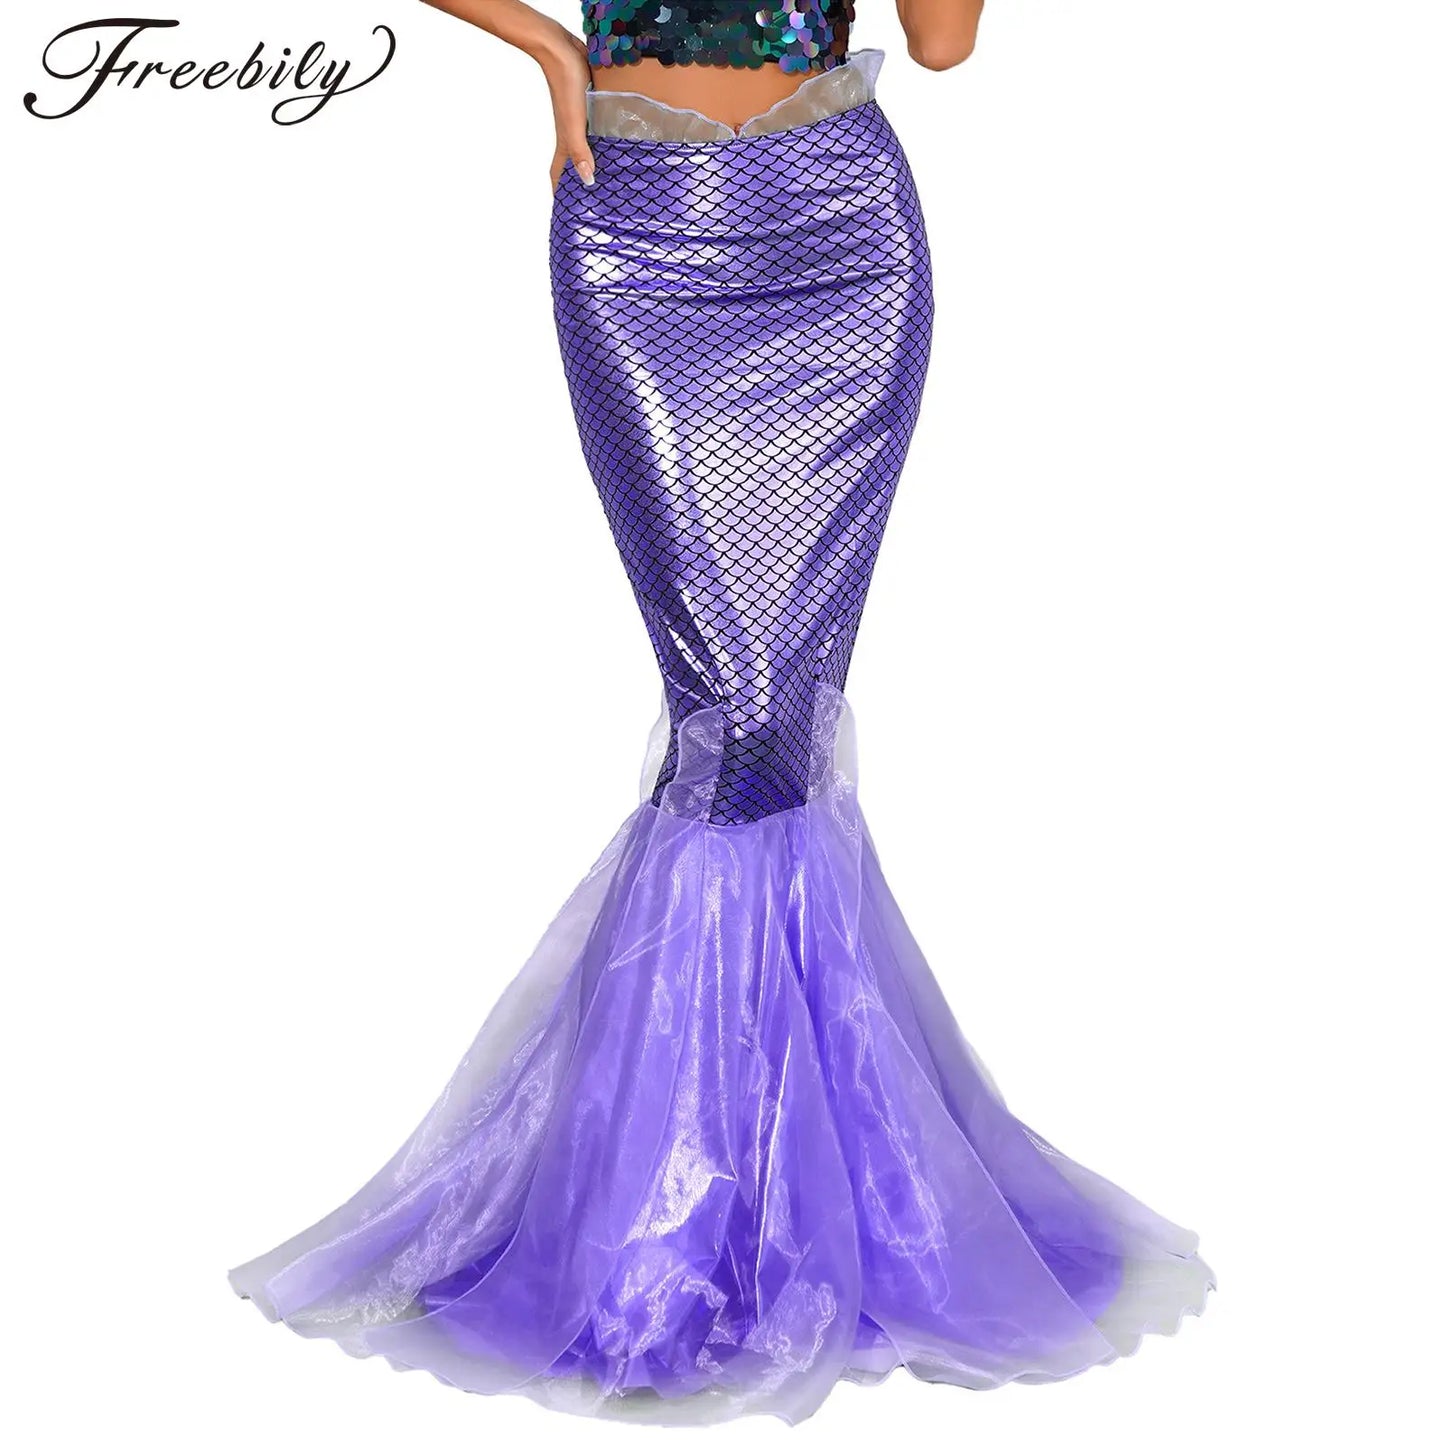 Womens Halloween Mermaid Maxi Skirt Cascading Tulle Fish Scale Print Shiny Fishtail Skirt Princess Cosplay Party Fancy Dress-Up